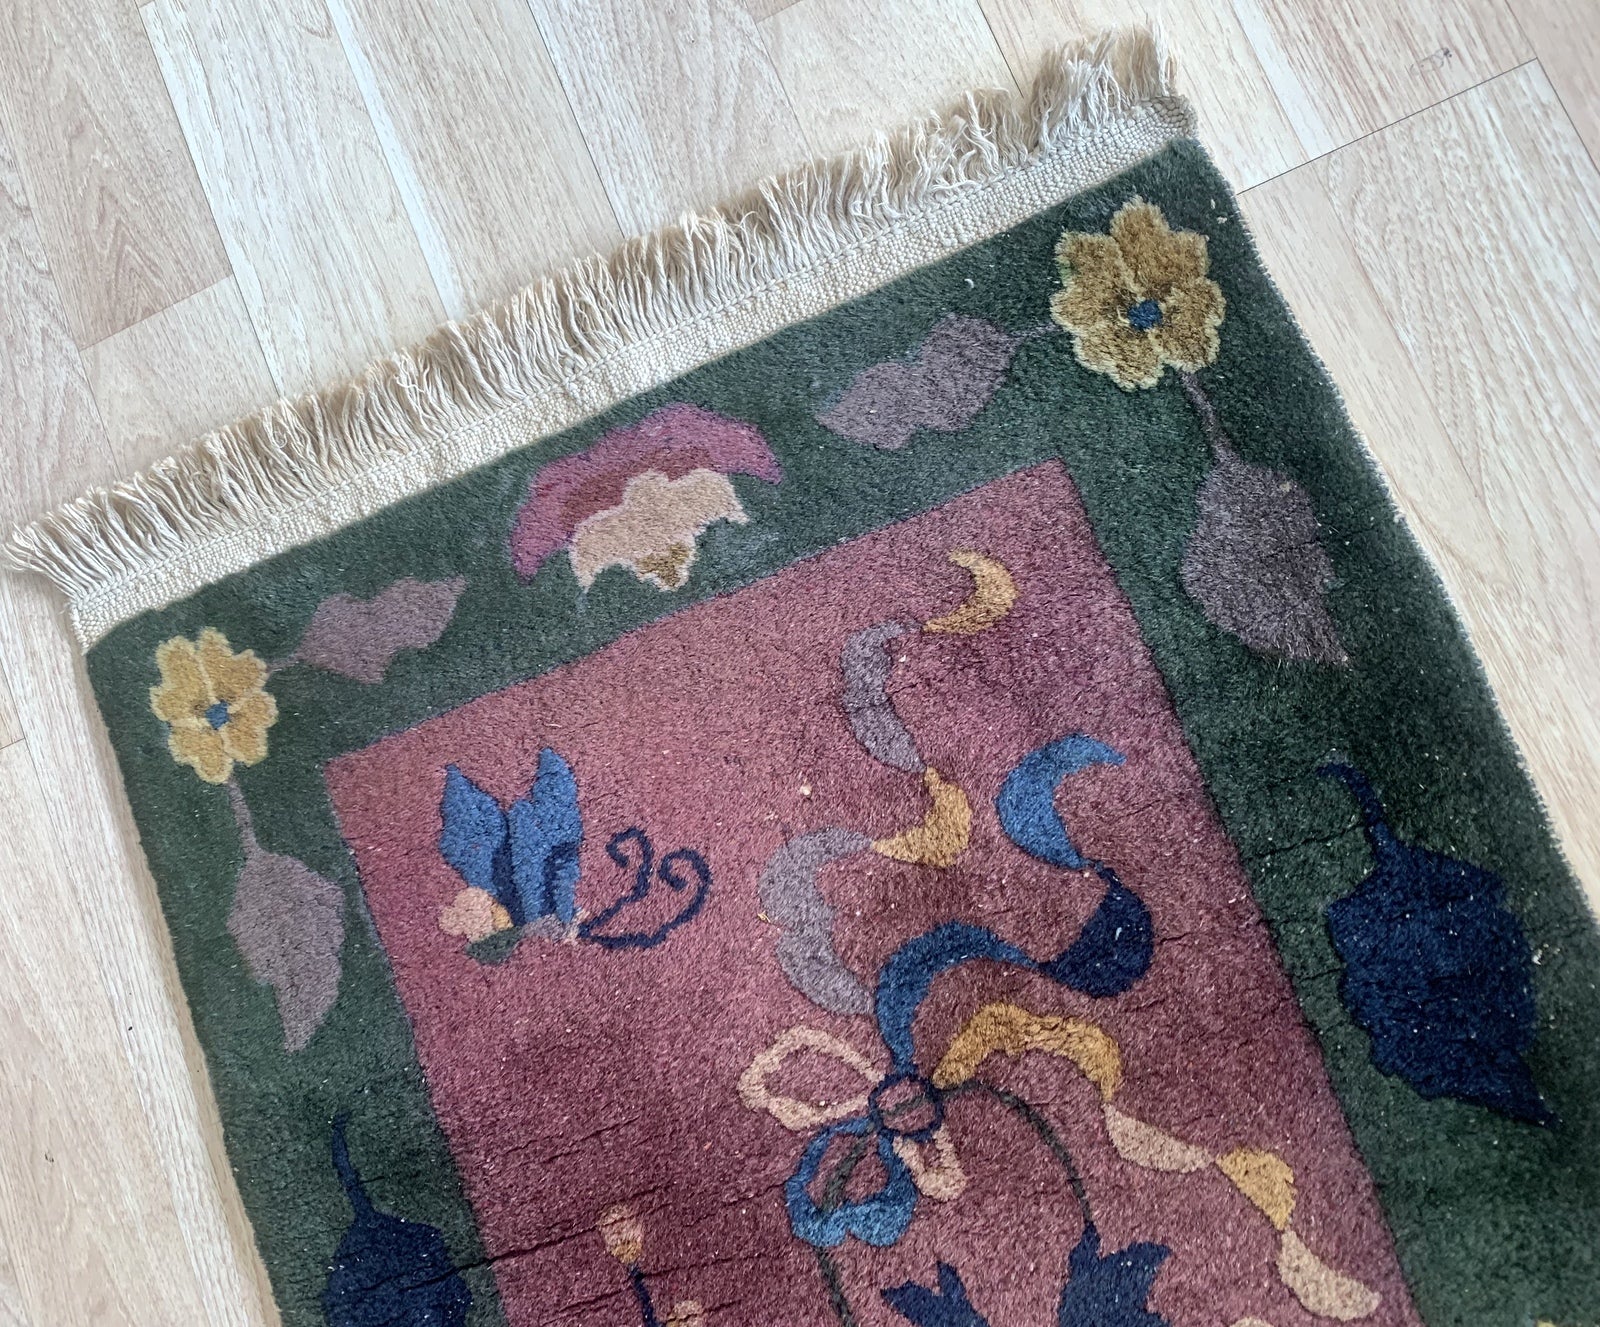 Detailed view of the rug's rich color palette